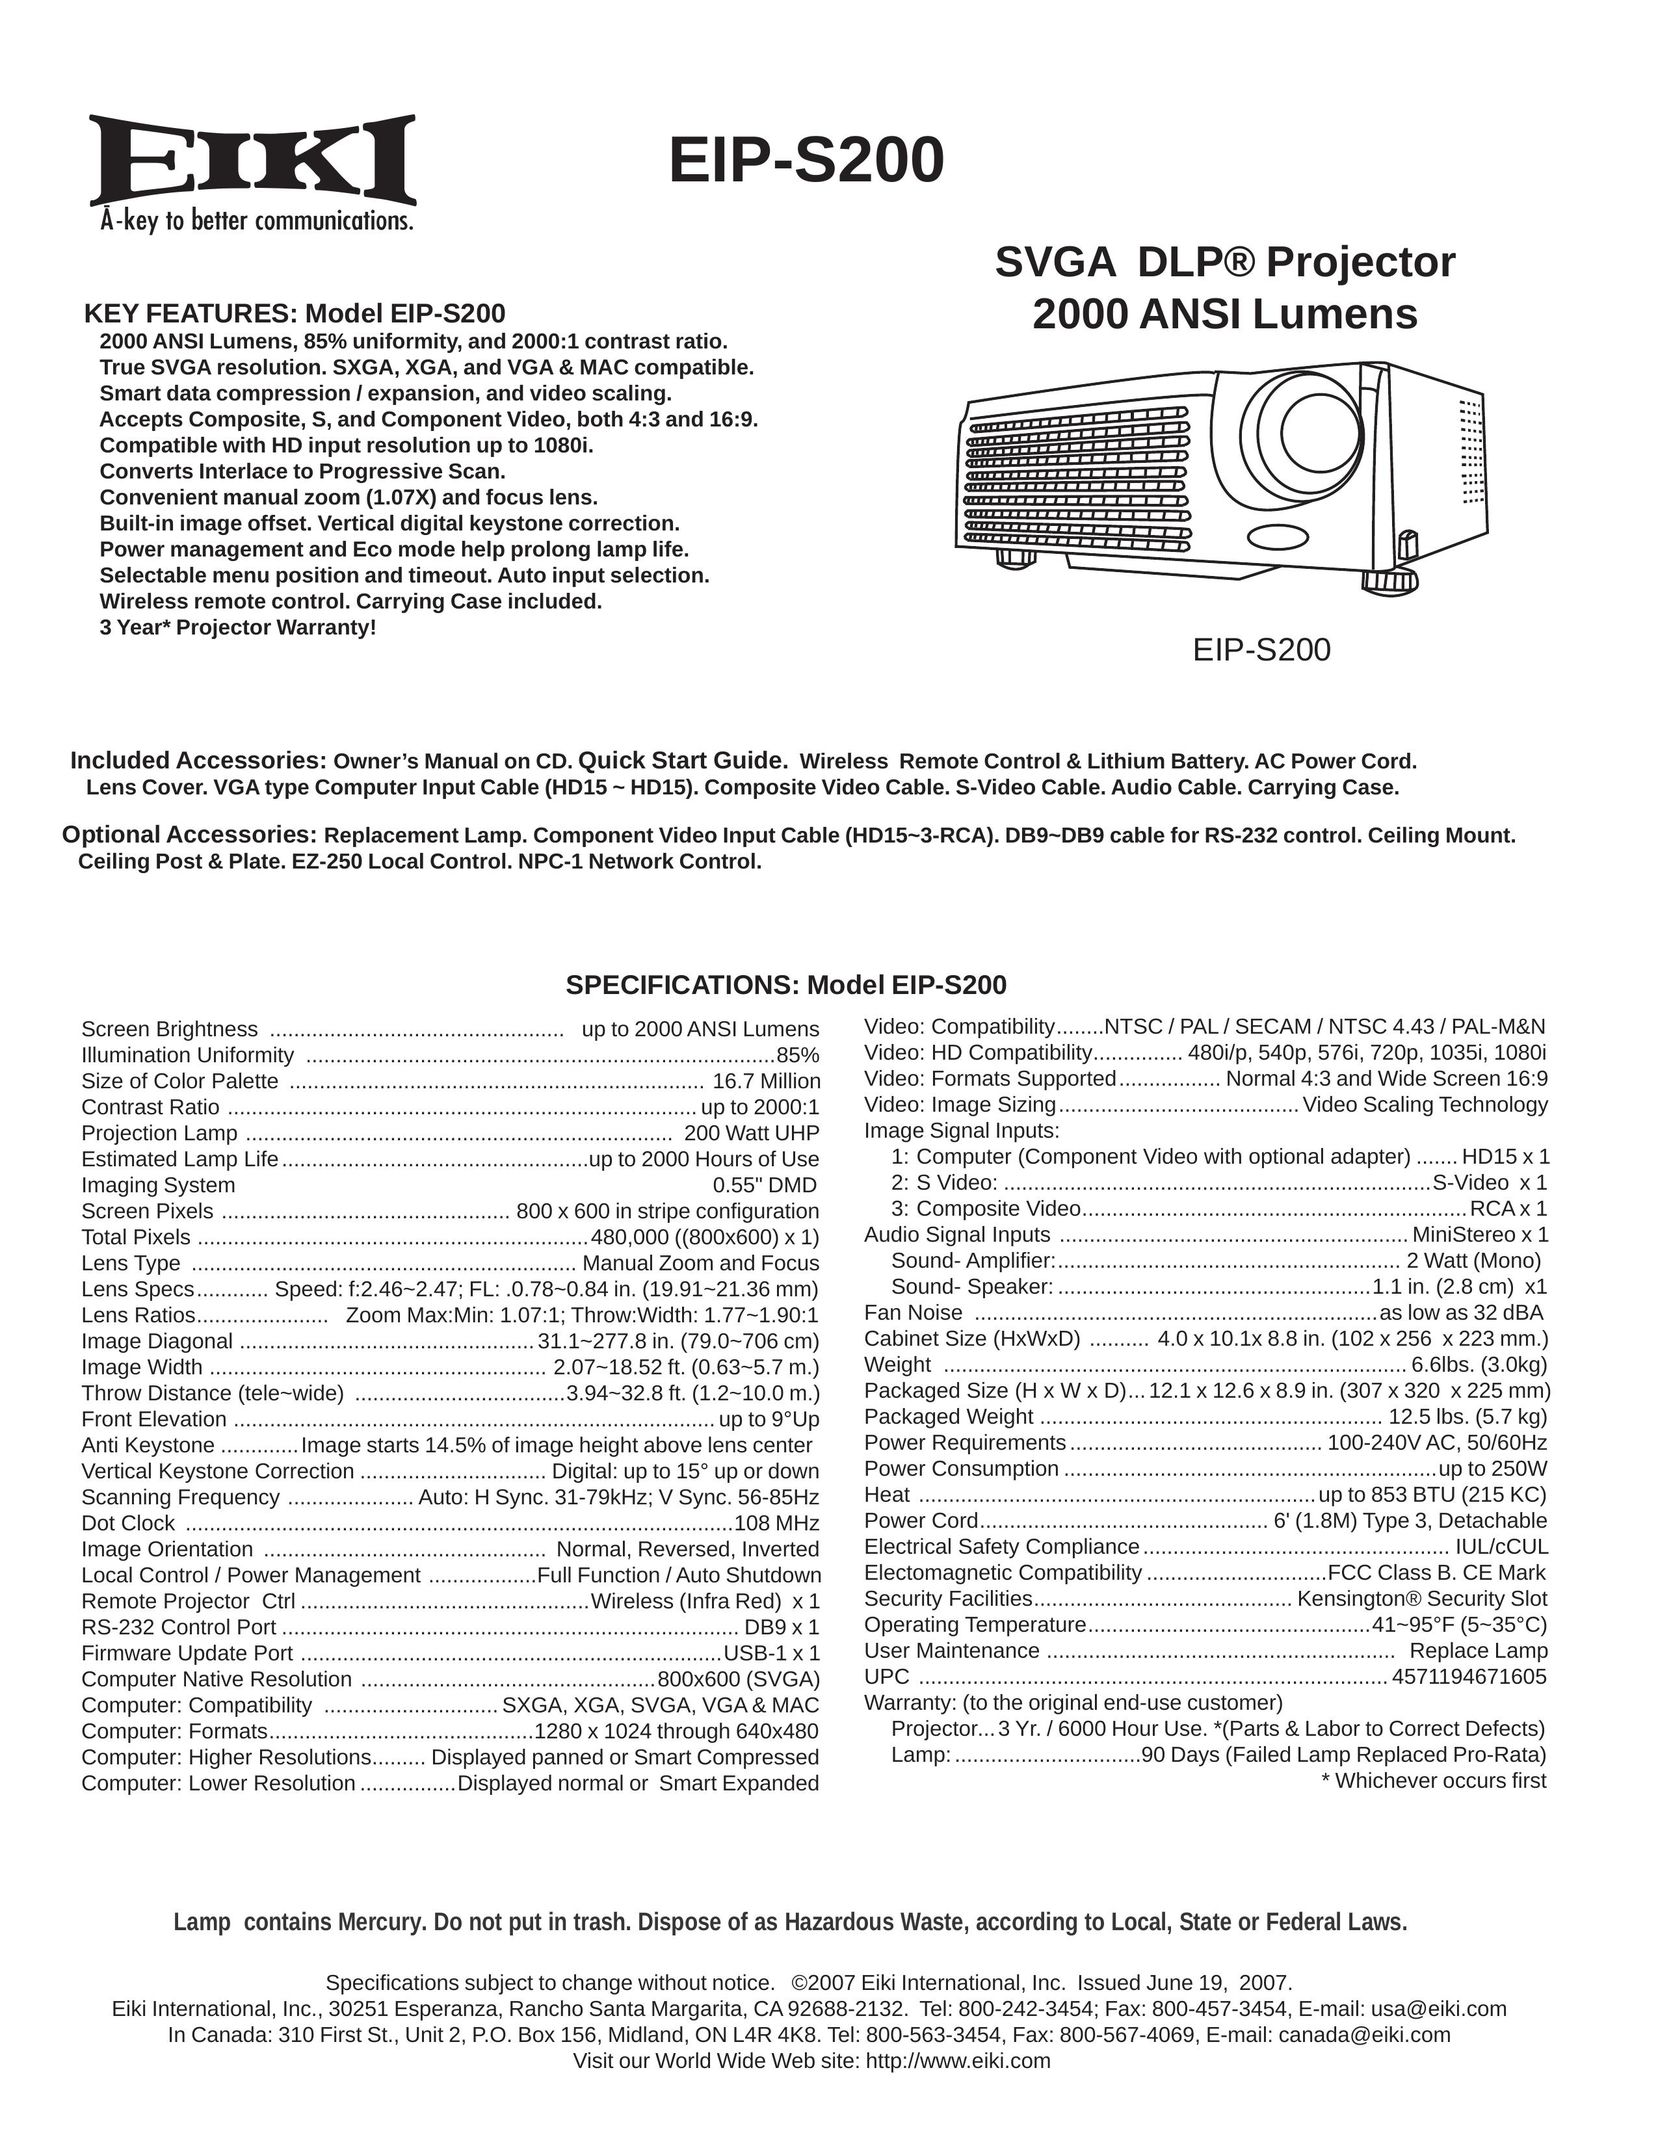 Eiki EIP-S200 Projection Television User Manual